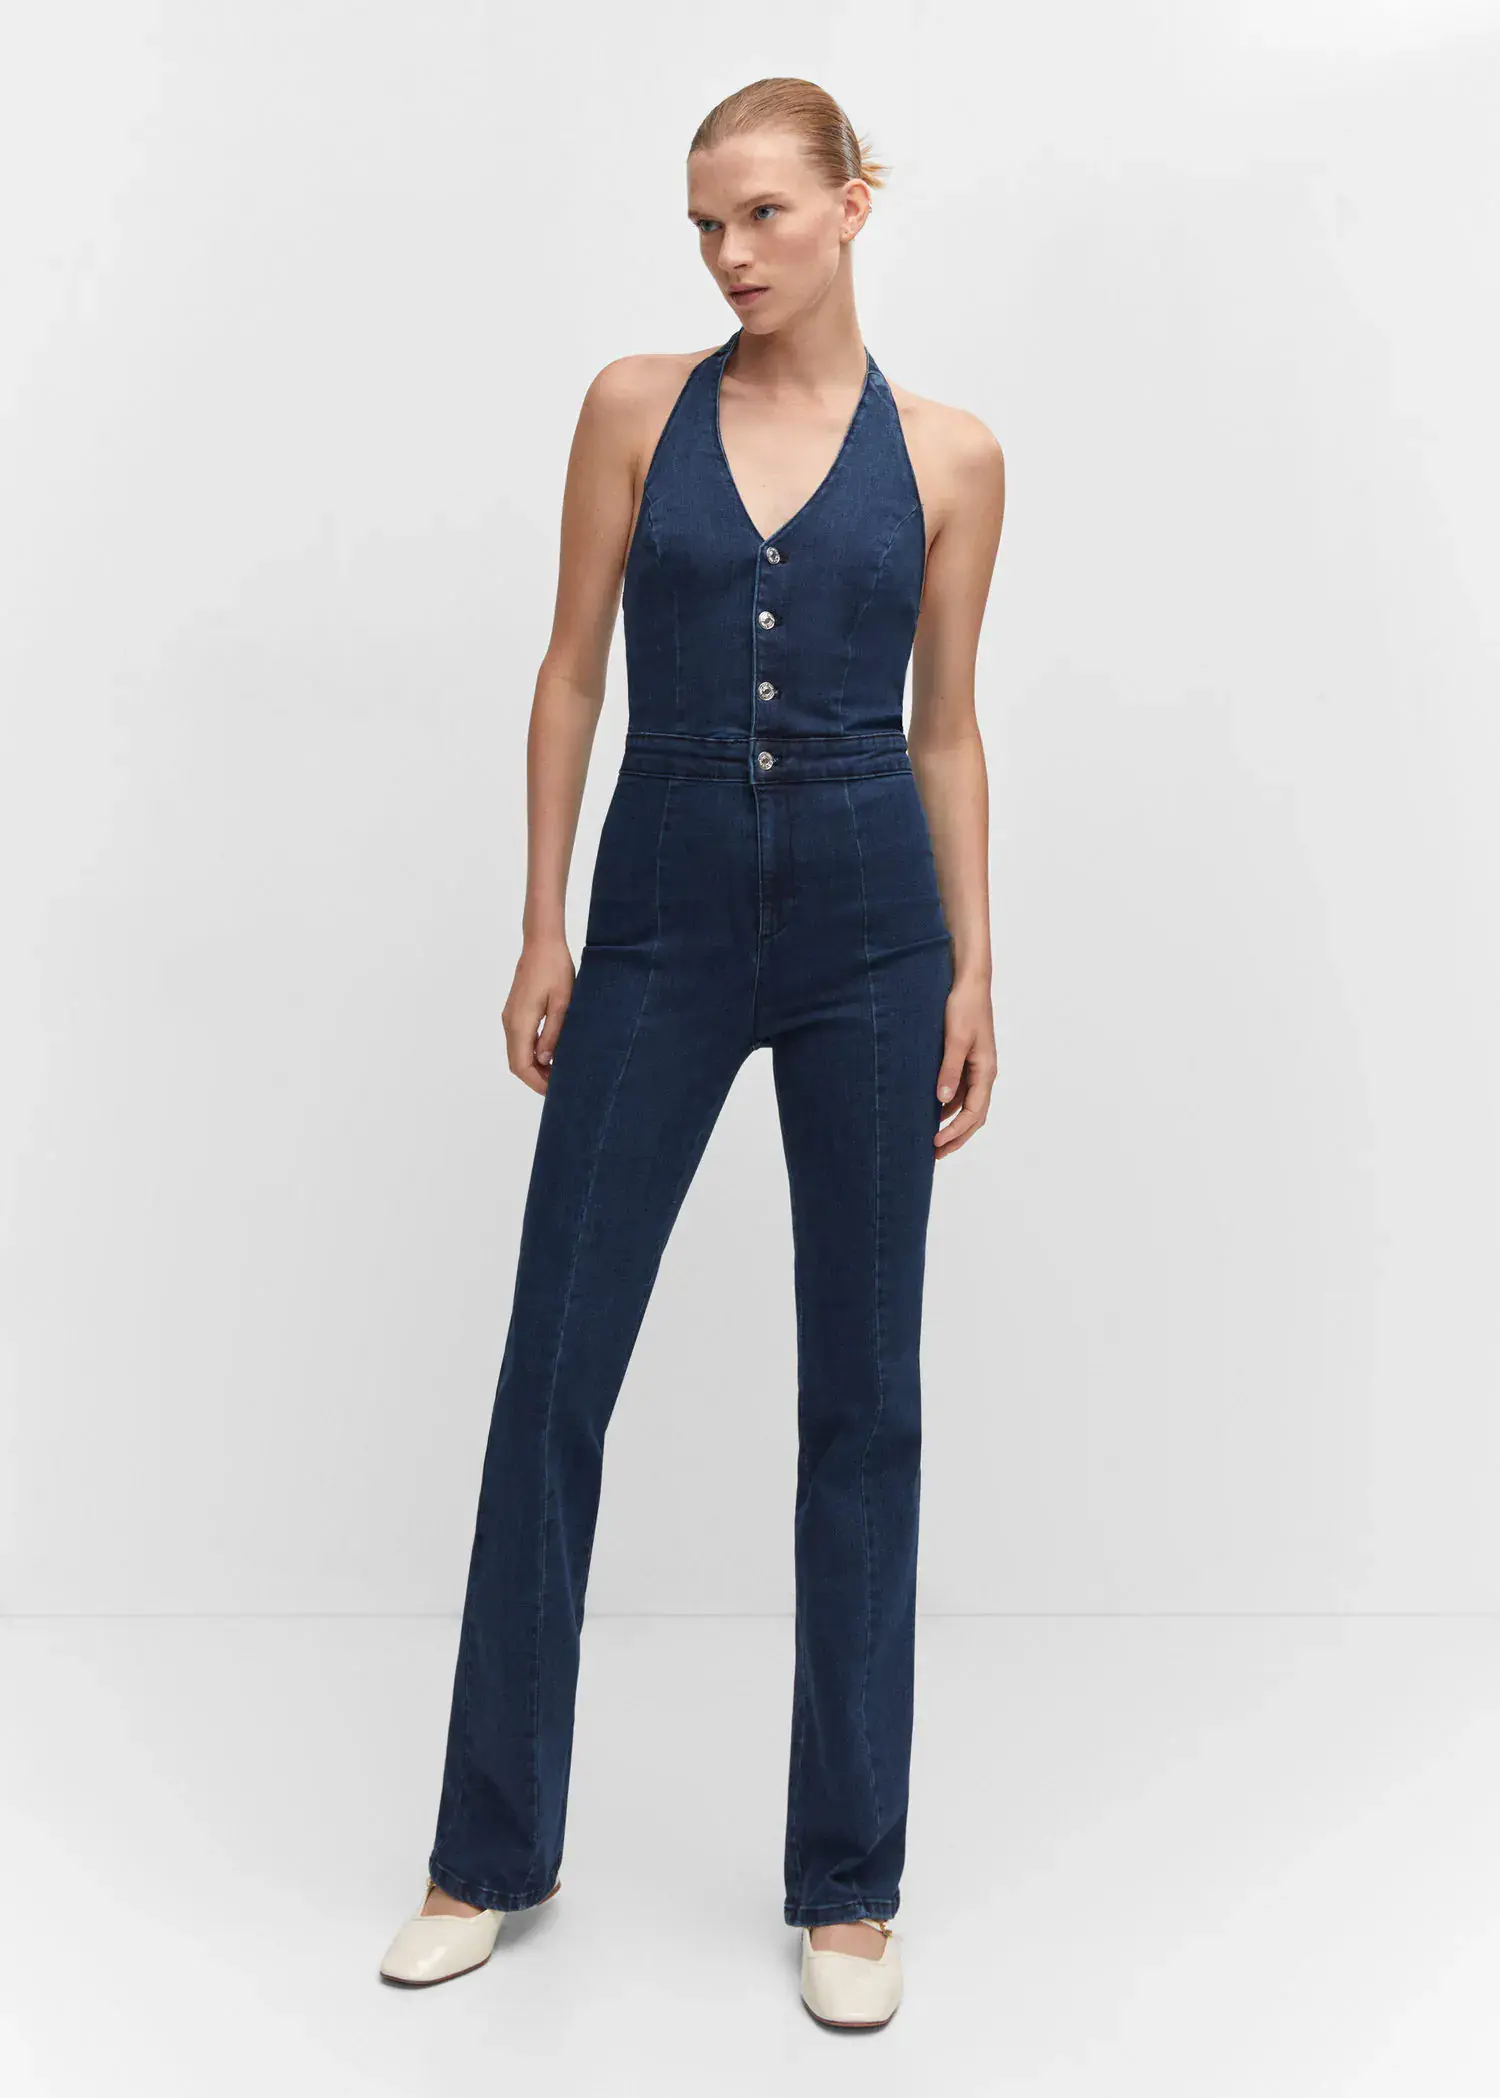 Mango Denim halter-neck jumpsuit. a woman wearing a blue jumpsuit standing in front of a white wall. 